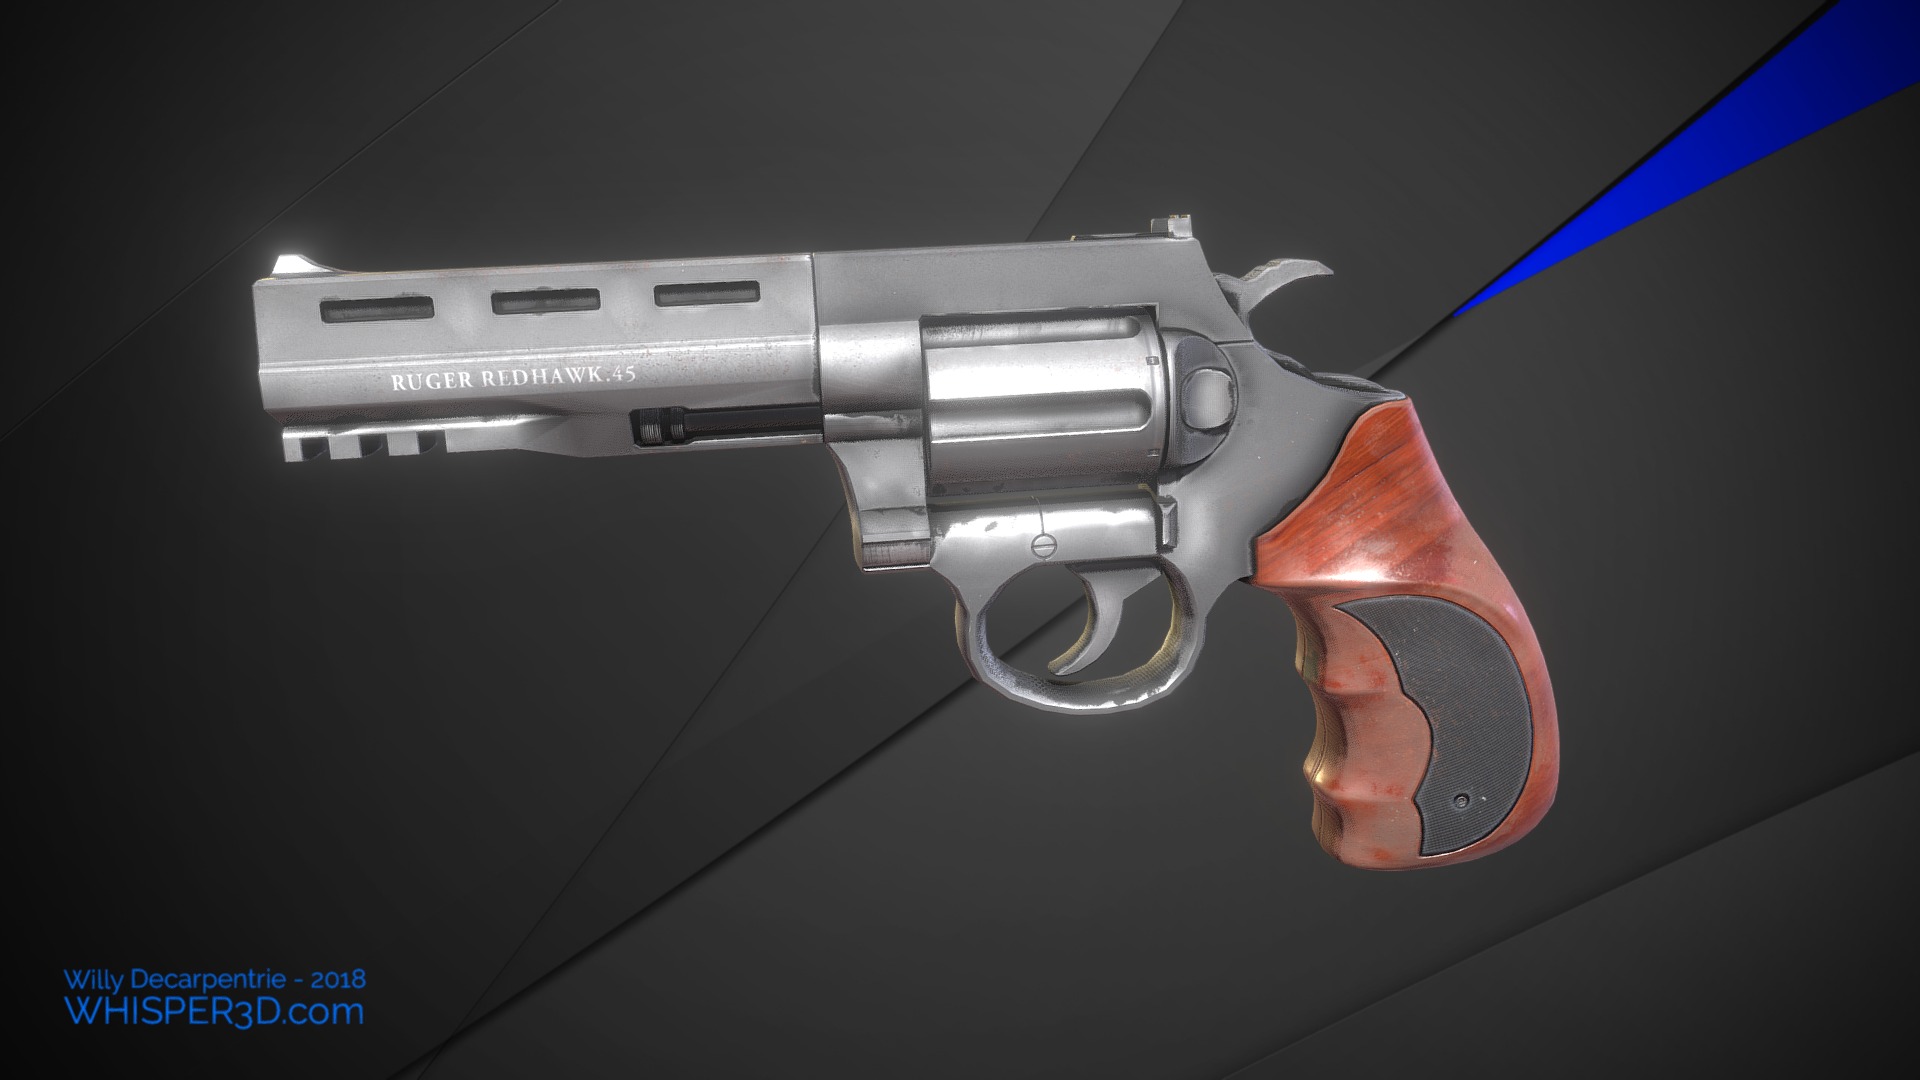 3D model Ruger Blackhawk - This is a 3D model of the Ruger Blackhawk. The 3D model is about a gun on a table.